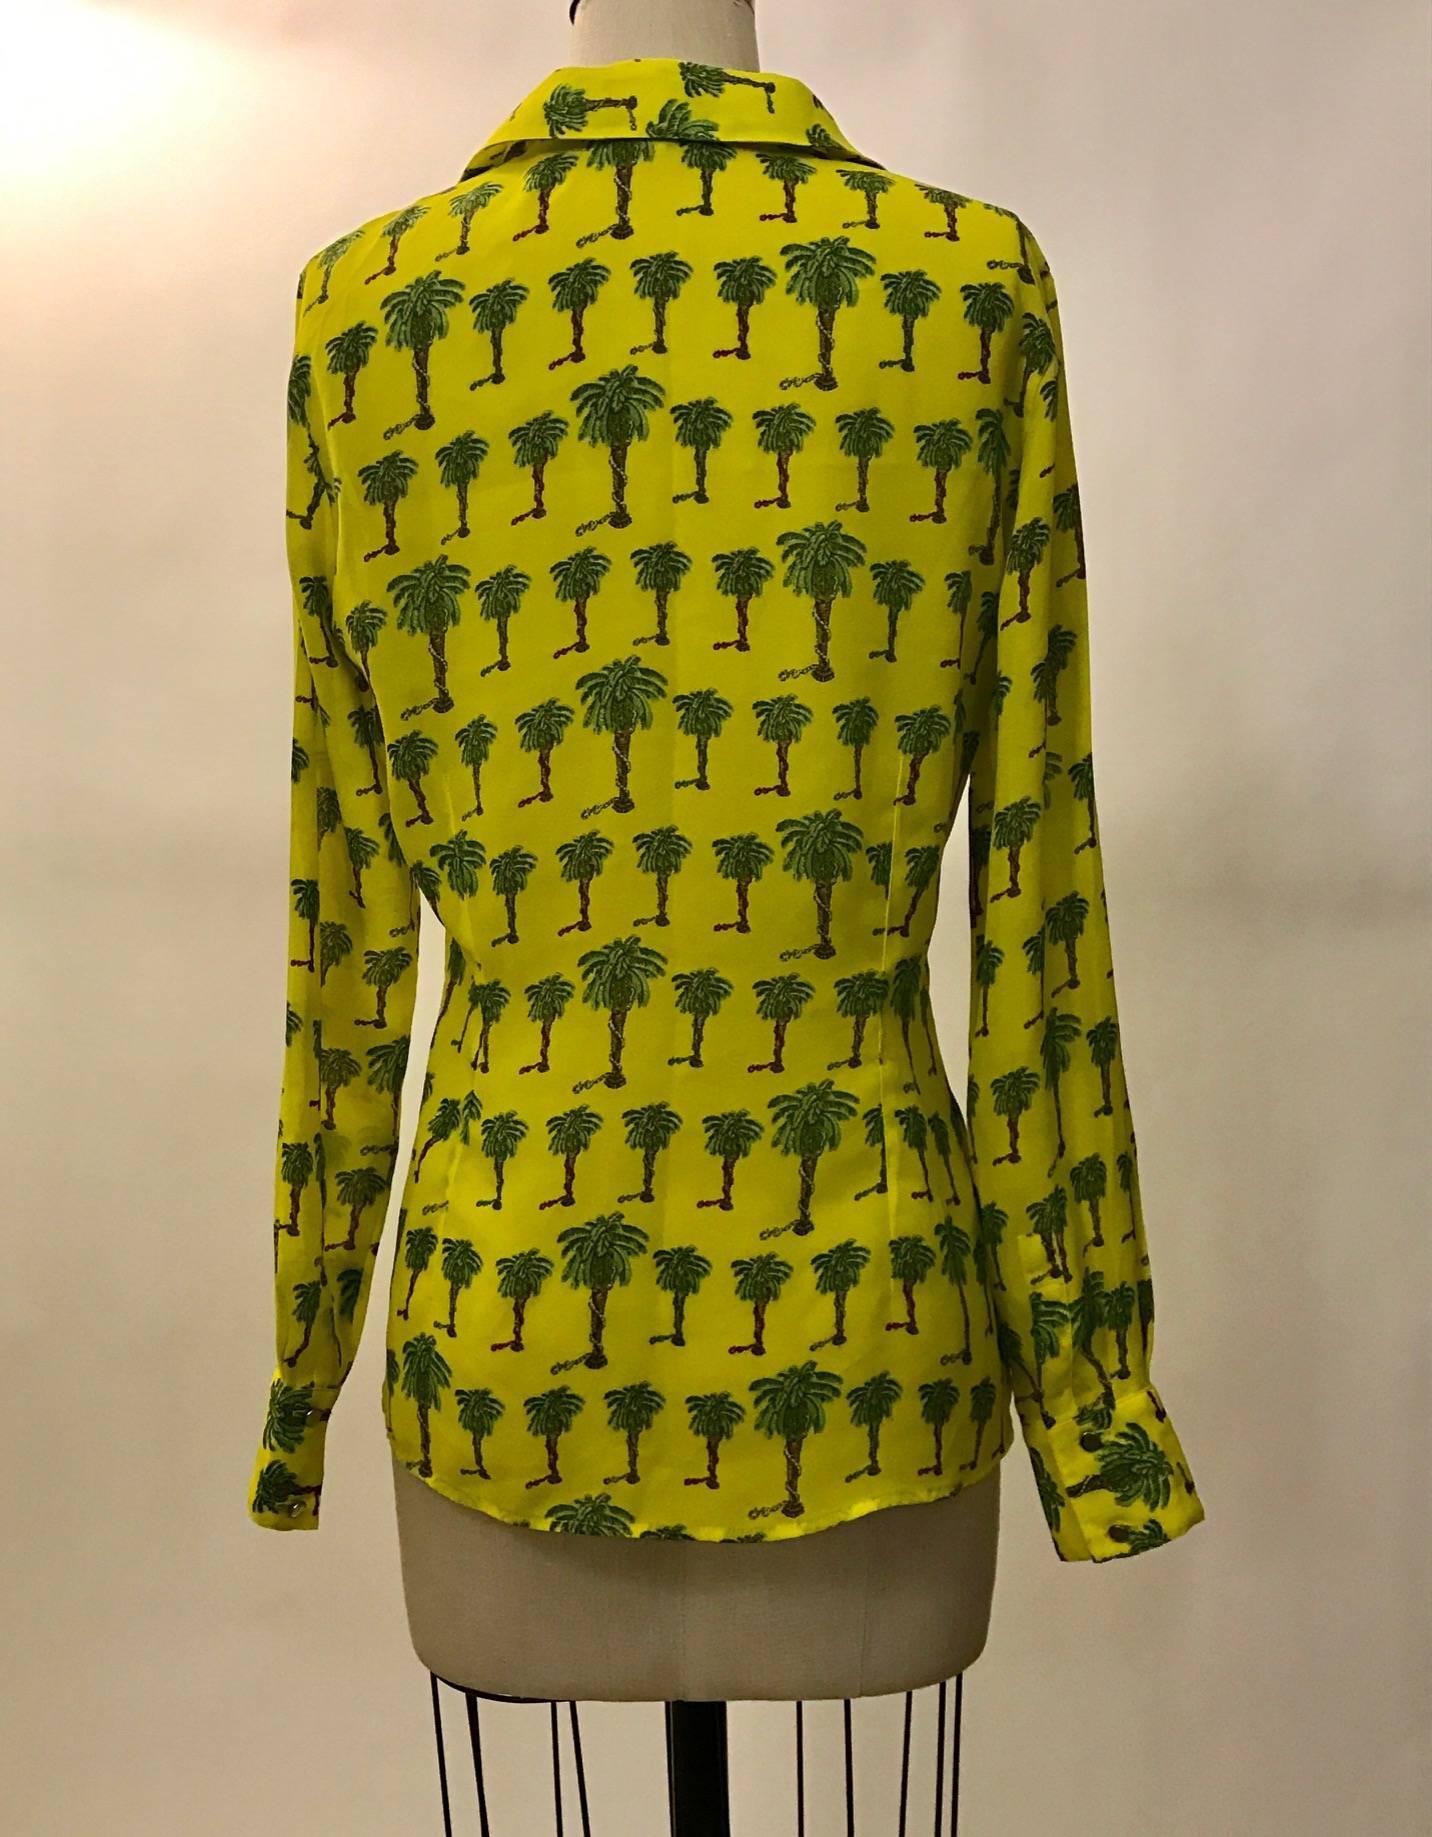 Versace Jeans Couture 1990s semi-sheer yellow collared shirt with palm tree print. Happy snakes in various colors climb the trunks of each tree. Patch pockets at each side of chest. Silver Versace medusa head logo buttons at front.

Made in